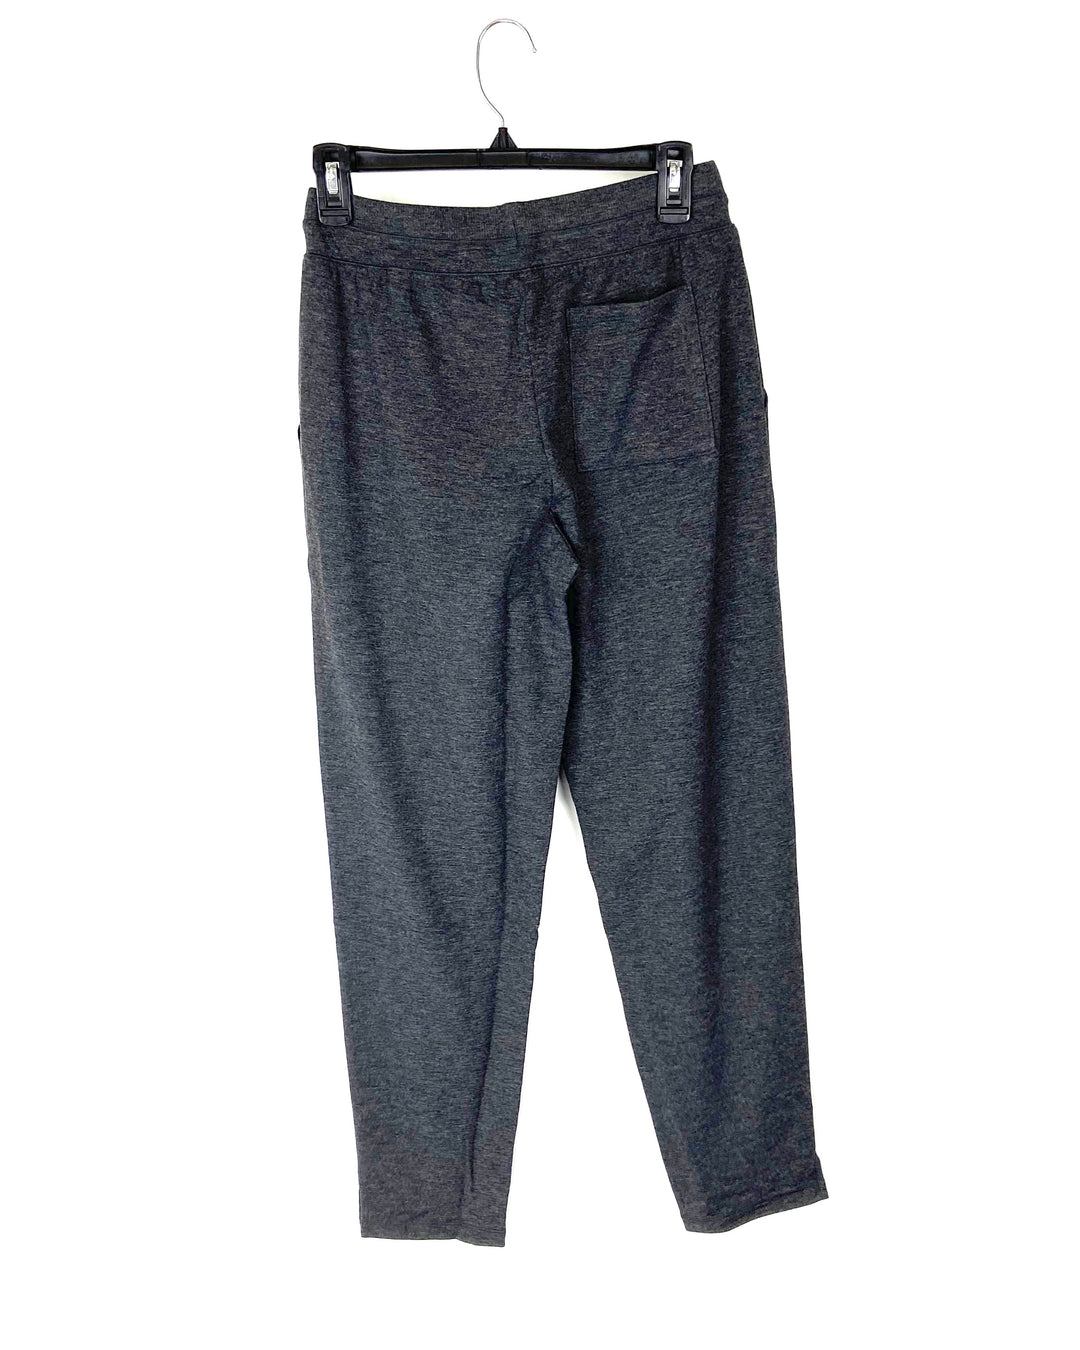 Grey Sweatpants - Extra Small and Small